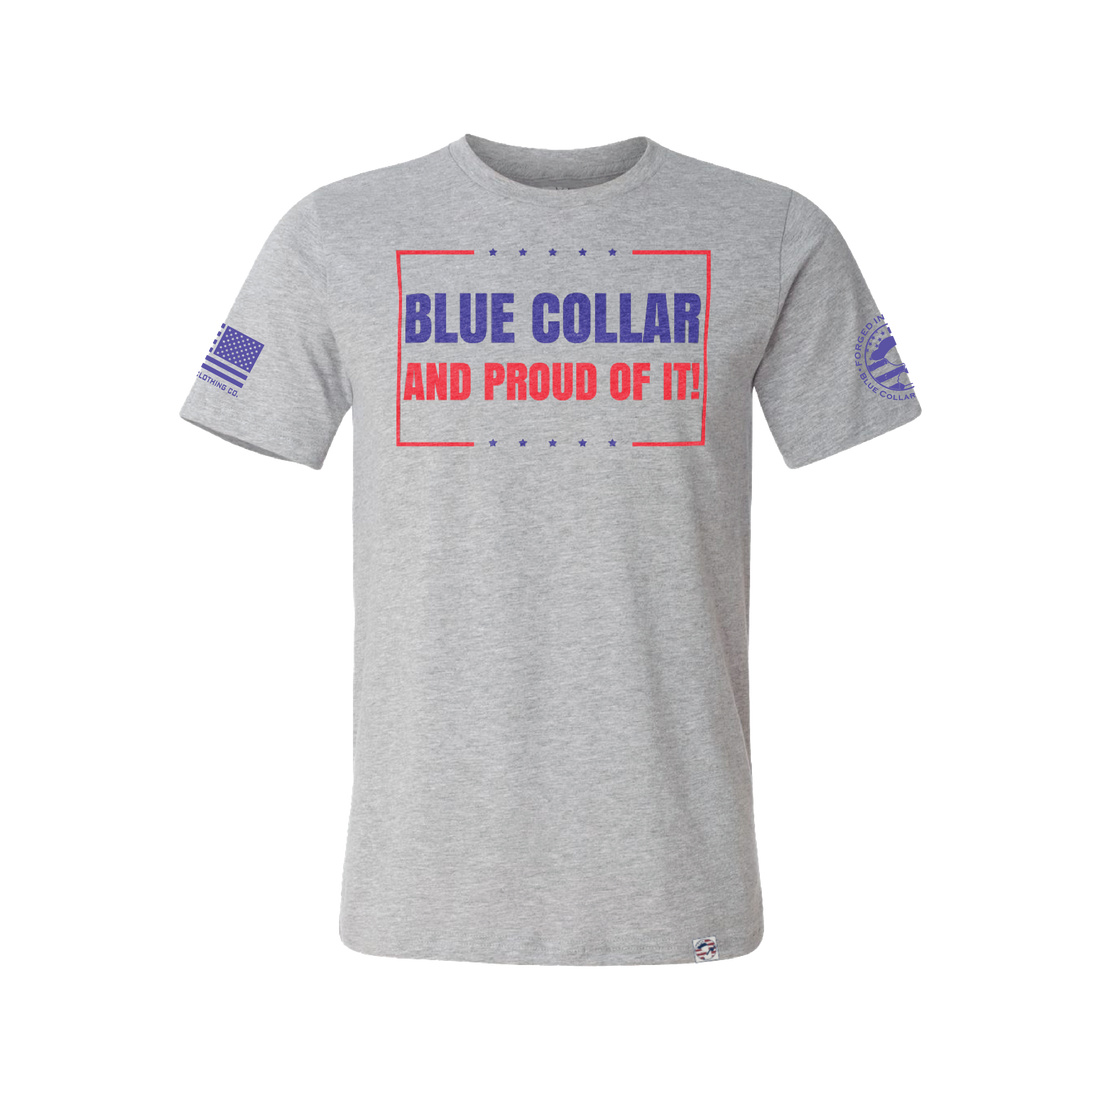 Blue Collar and Proud Of It!